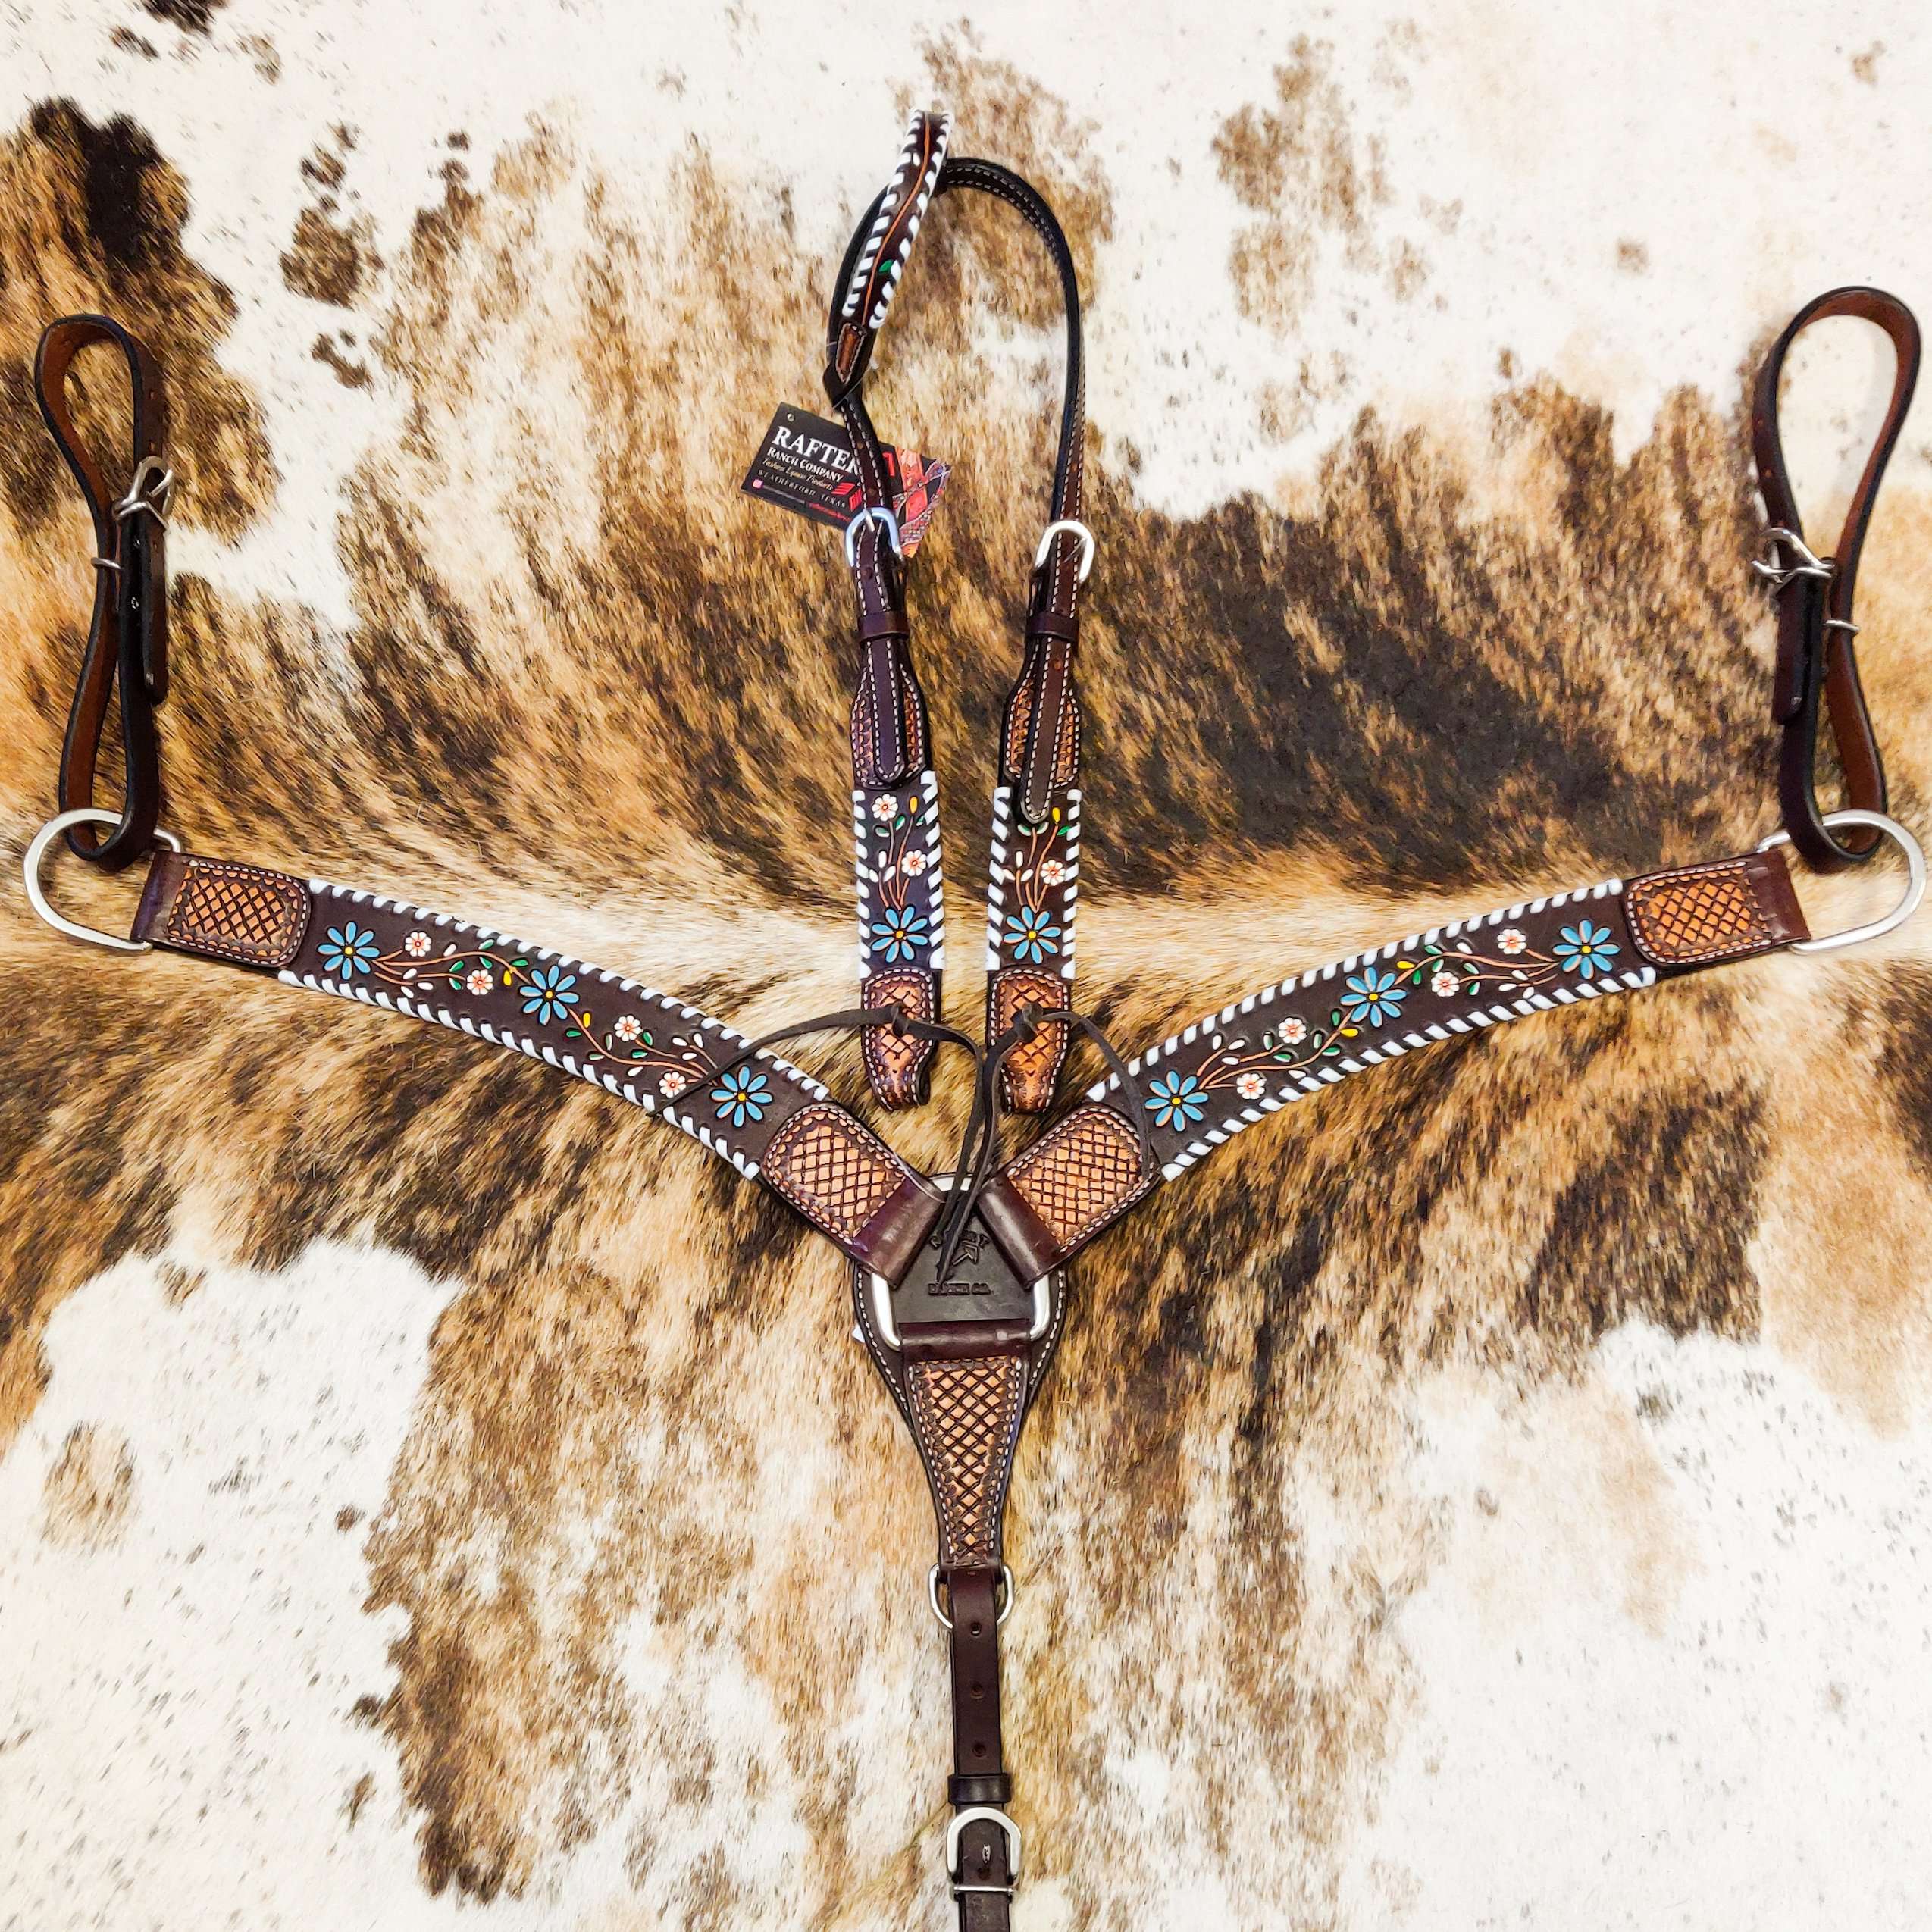 The Floral Vine Tack Collection - The Glamorous Cowgirl